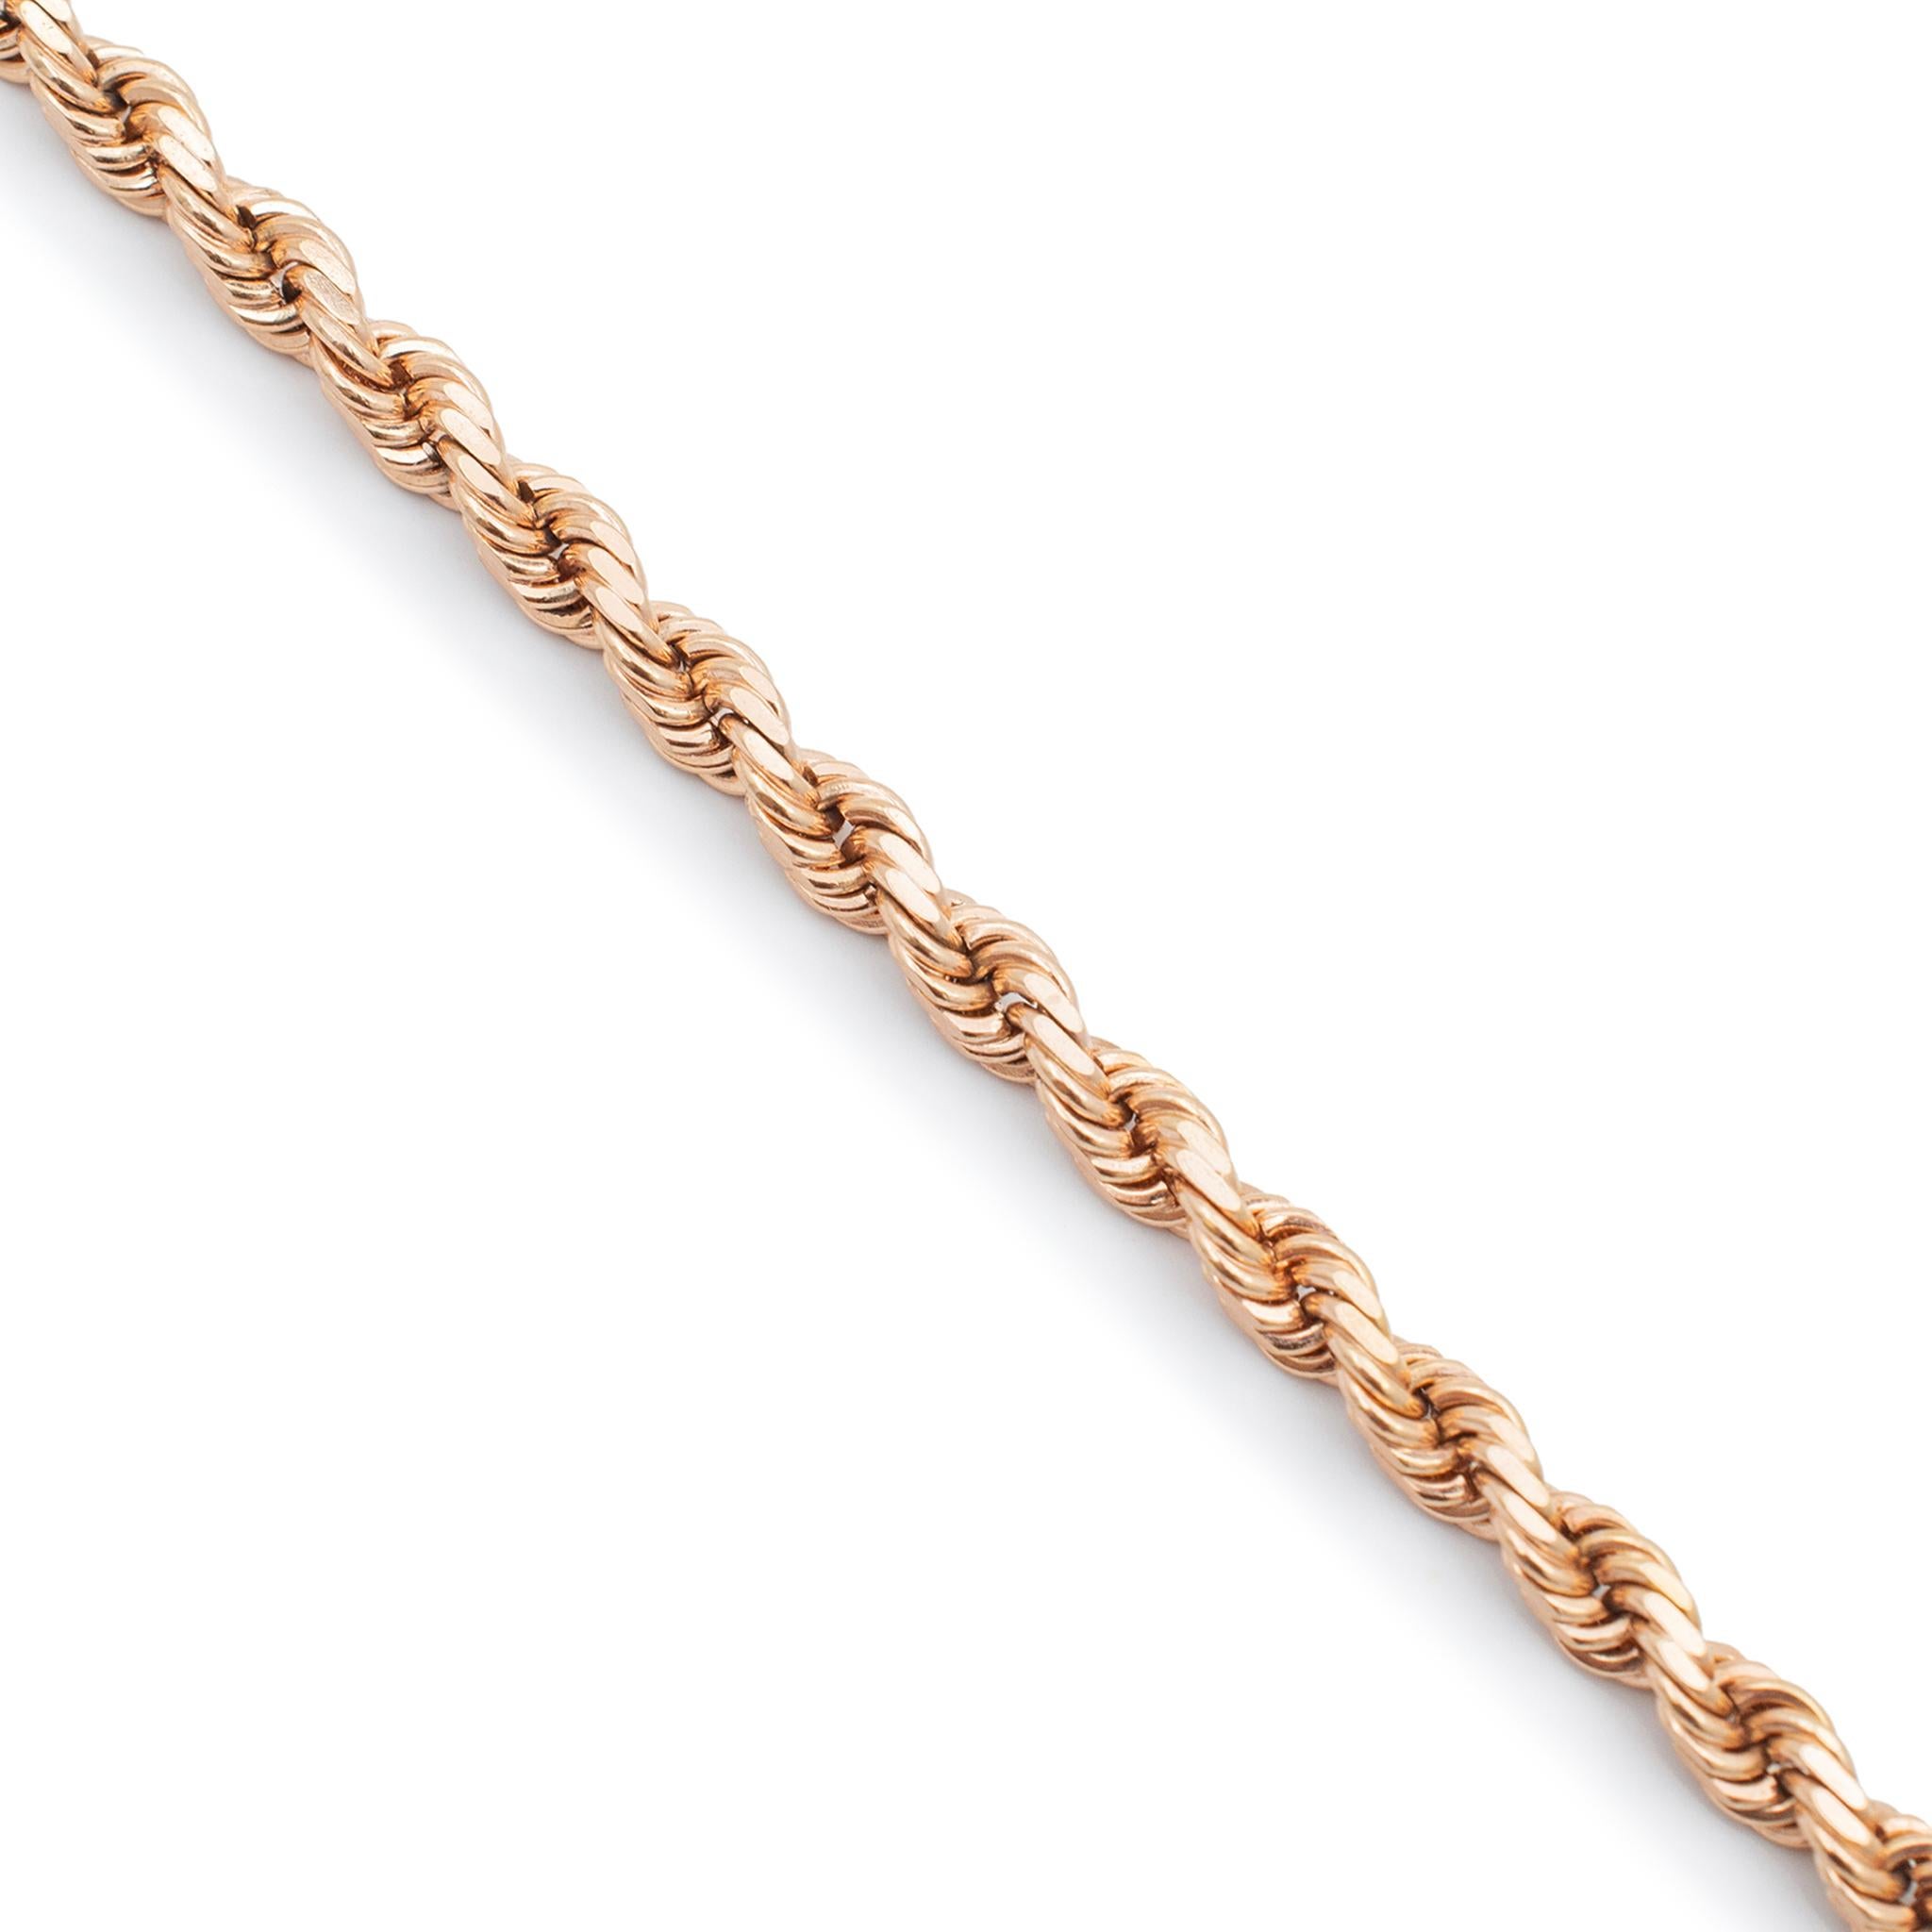 Gender: Unisex

Metal Type: 10K Rose Gold

Length: 22.00 inches

Width: 4.75 mm

Weight: 36.20 grams

10K rose gold rope link chain.  Engraved with 